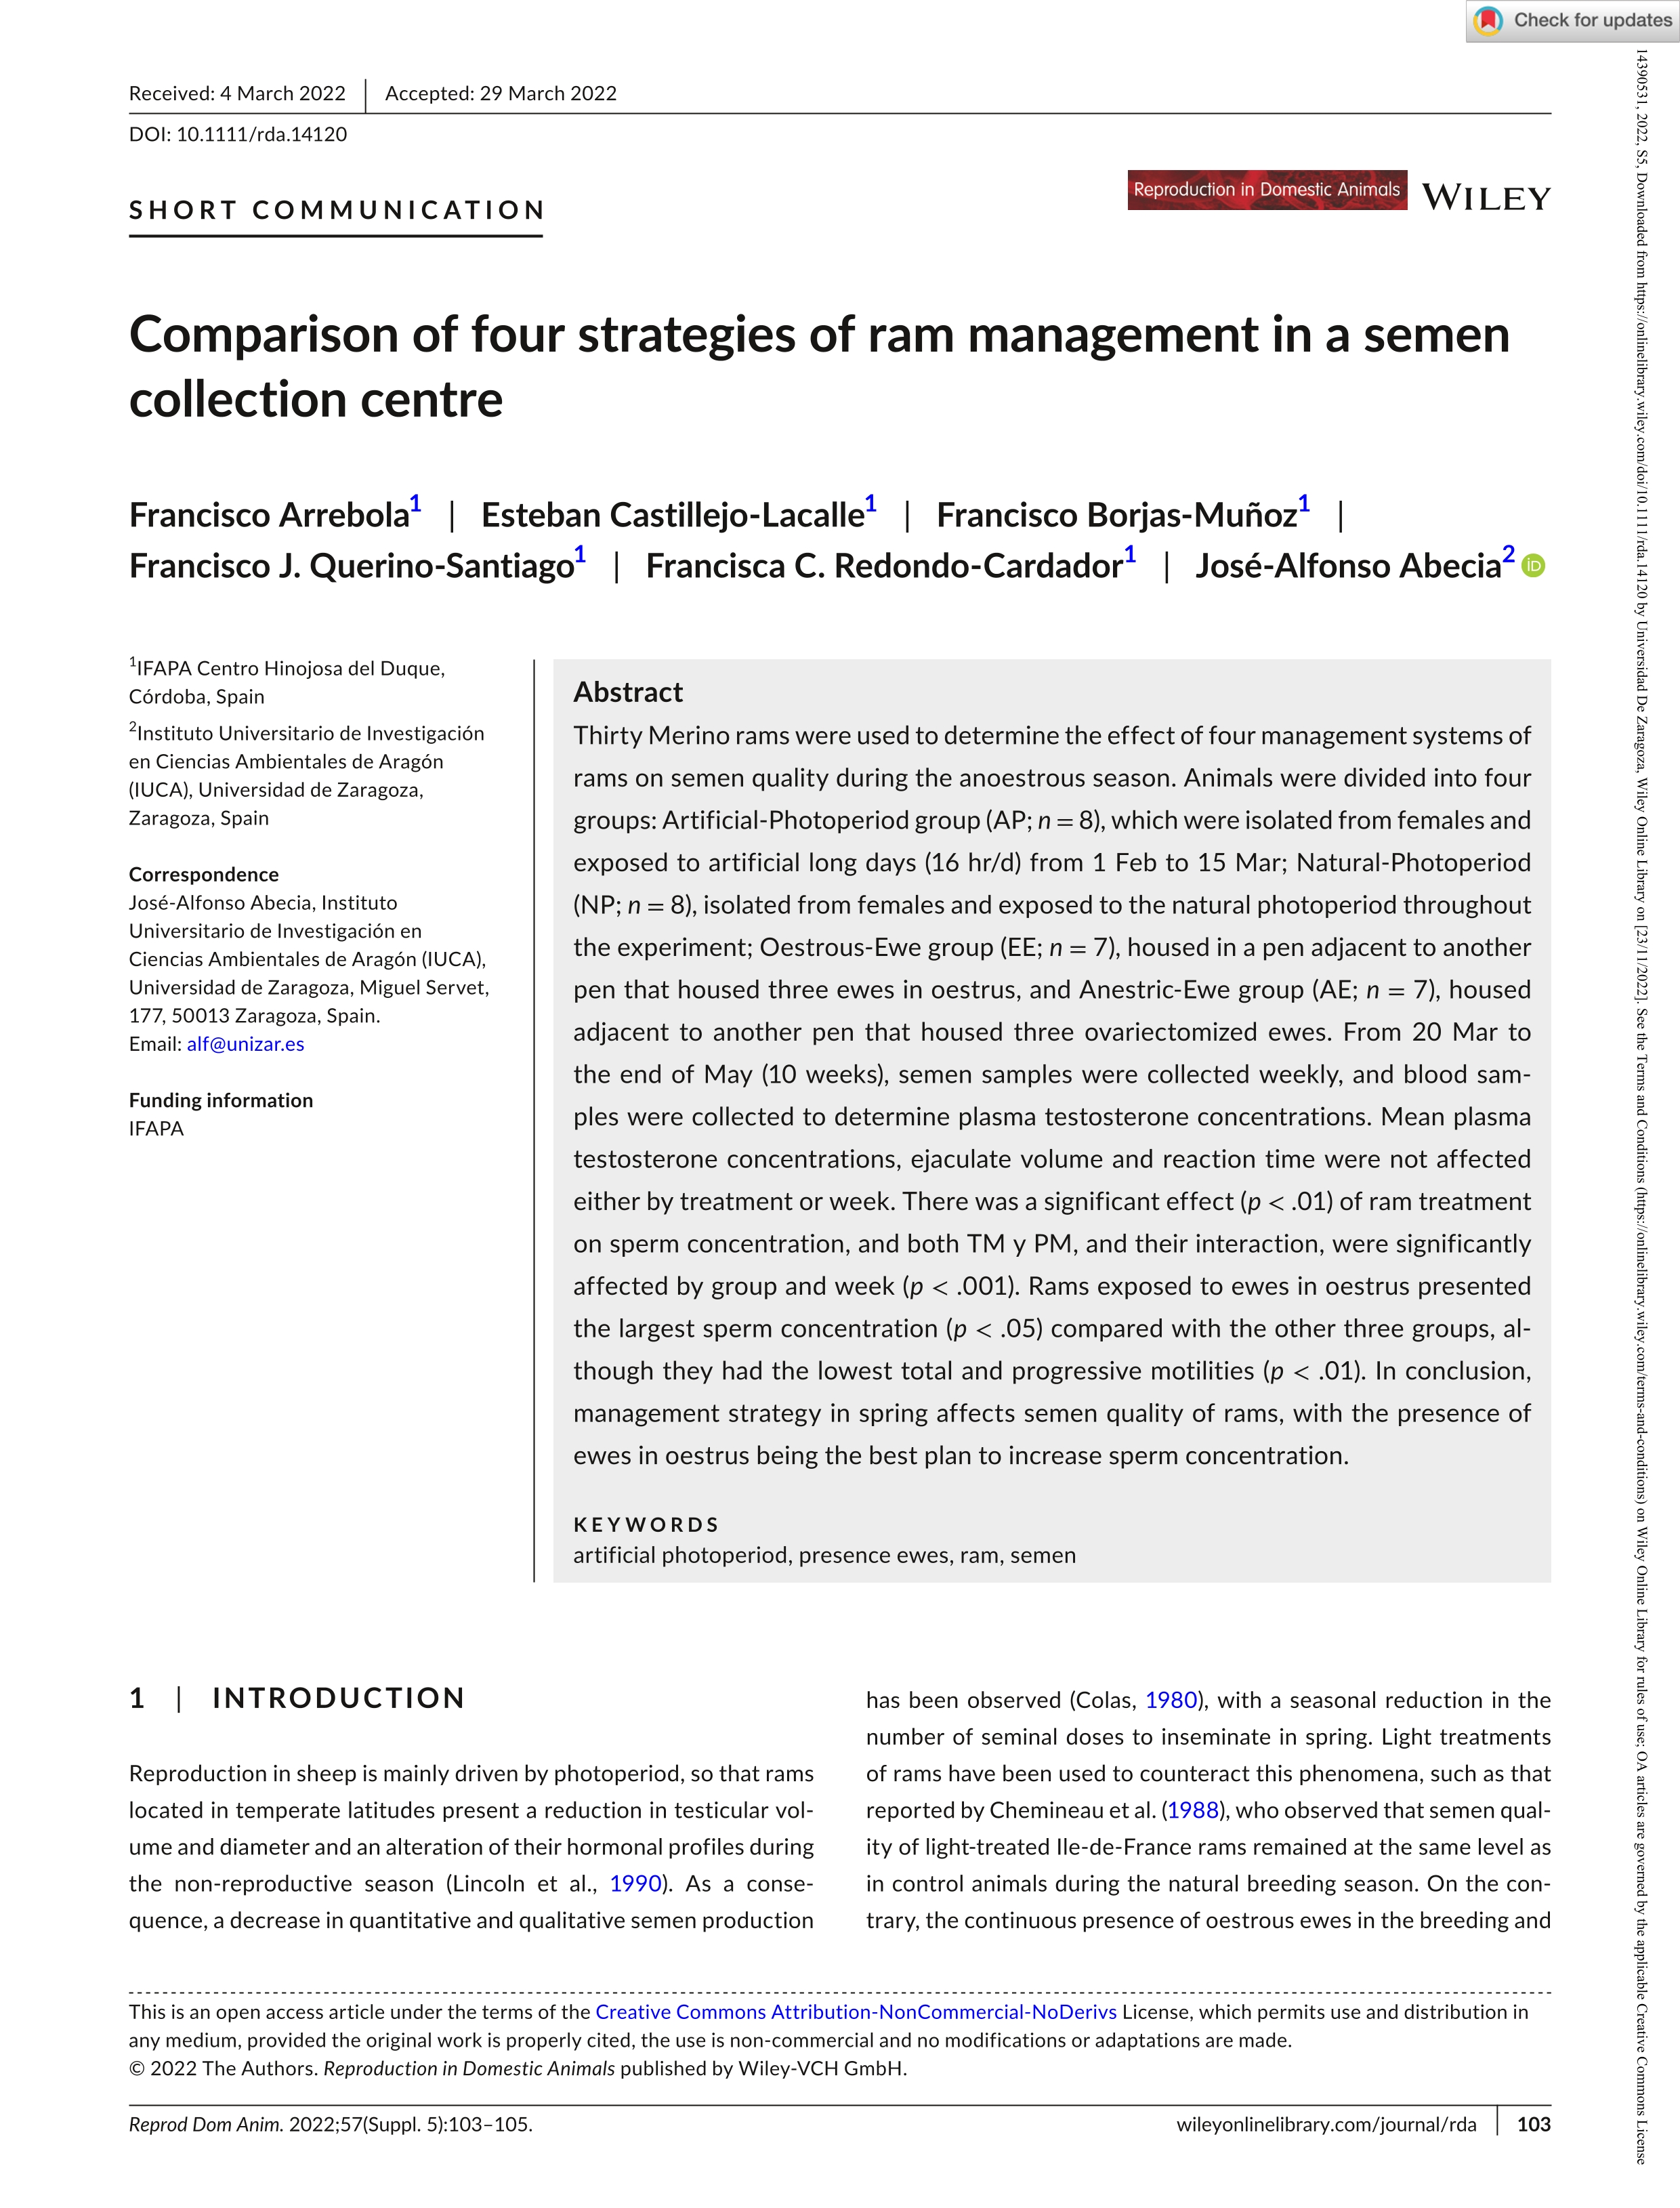 Comparison of four strategies of ram management in a semen collection centre